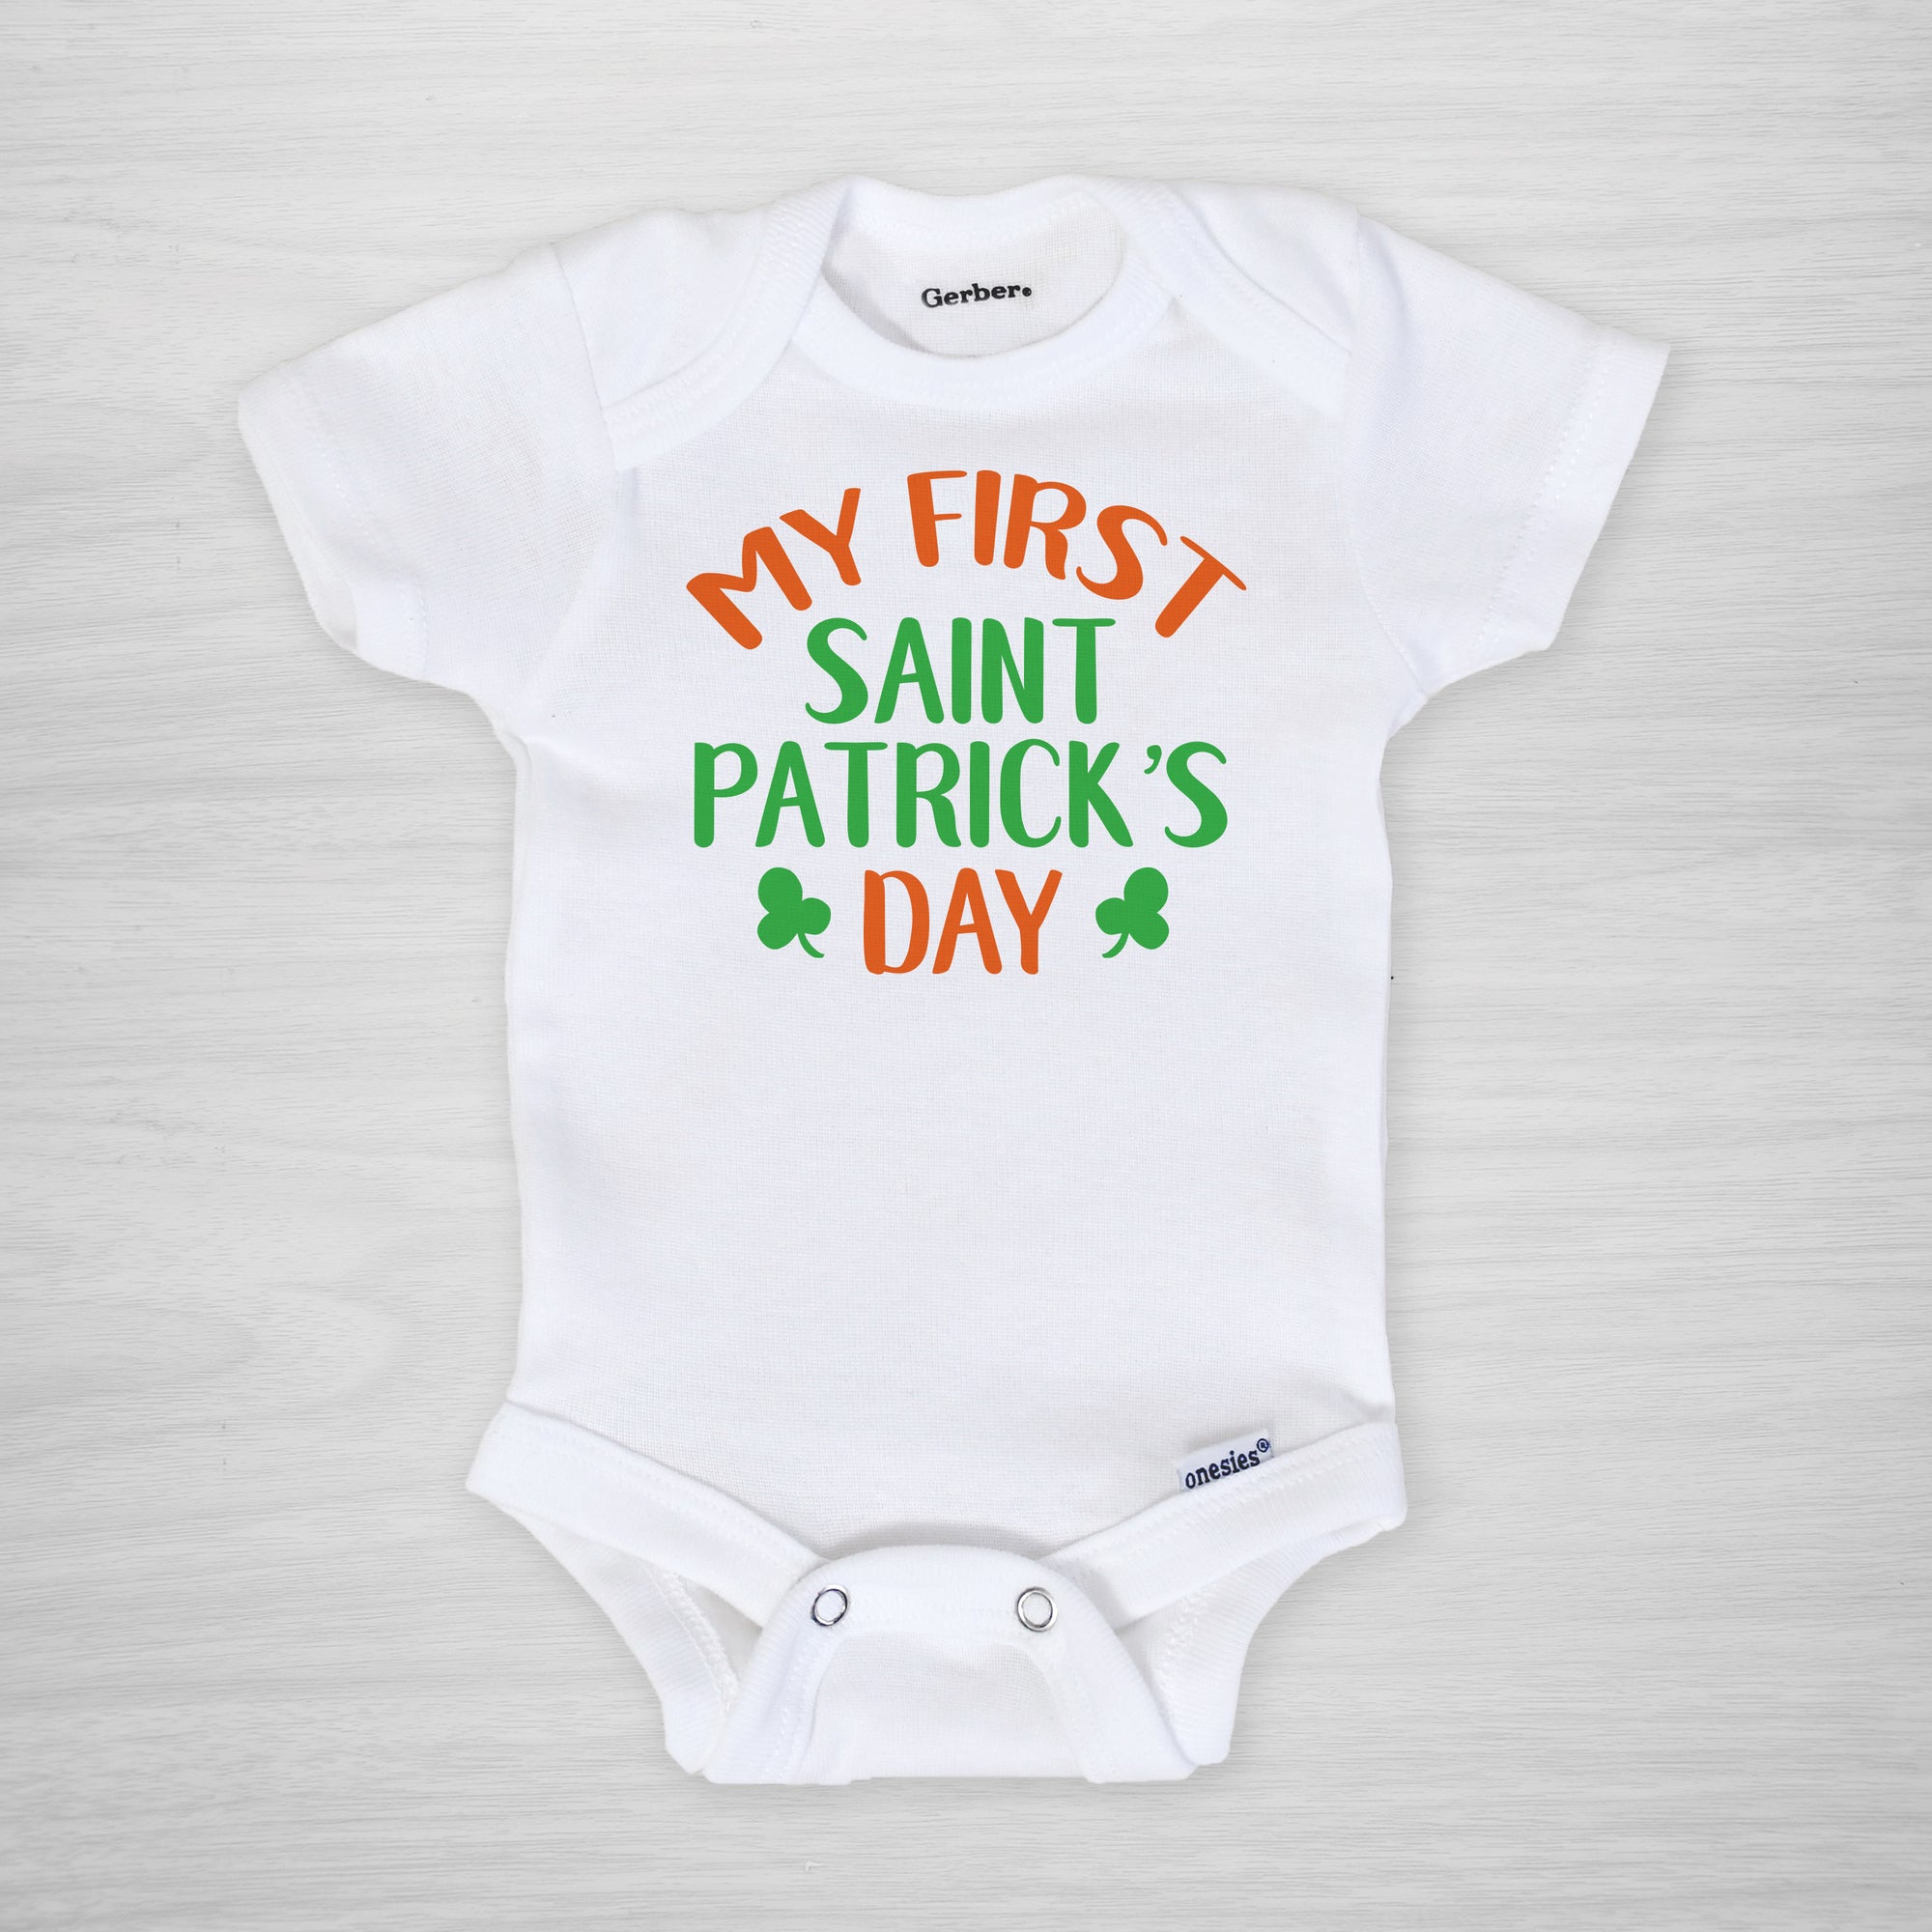 My First Saint Patrick's Day Onesie®, long sleeved